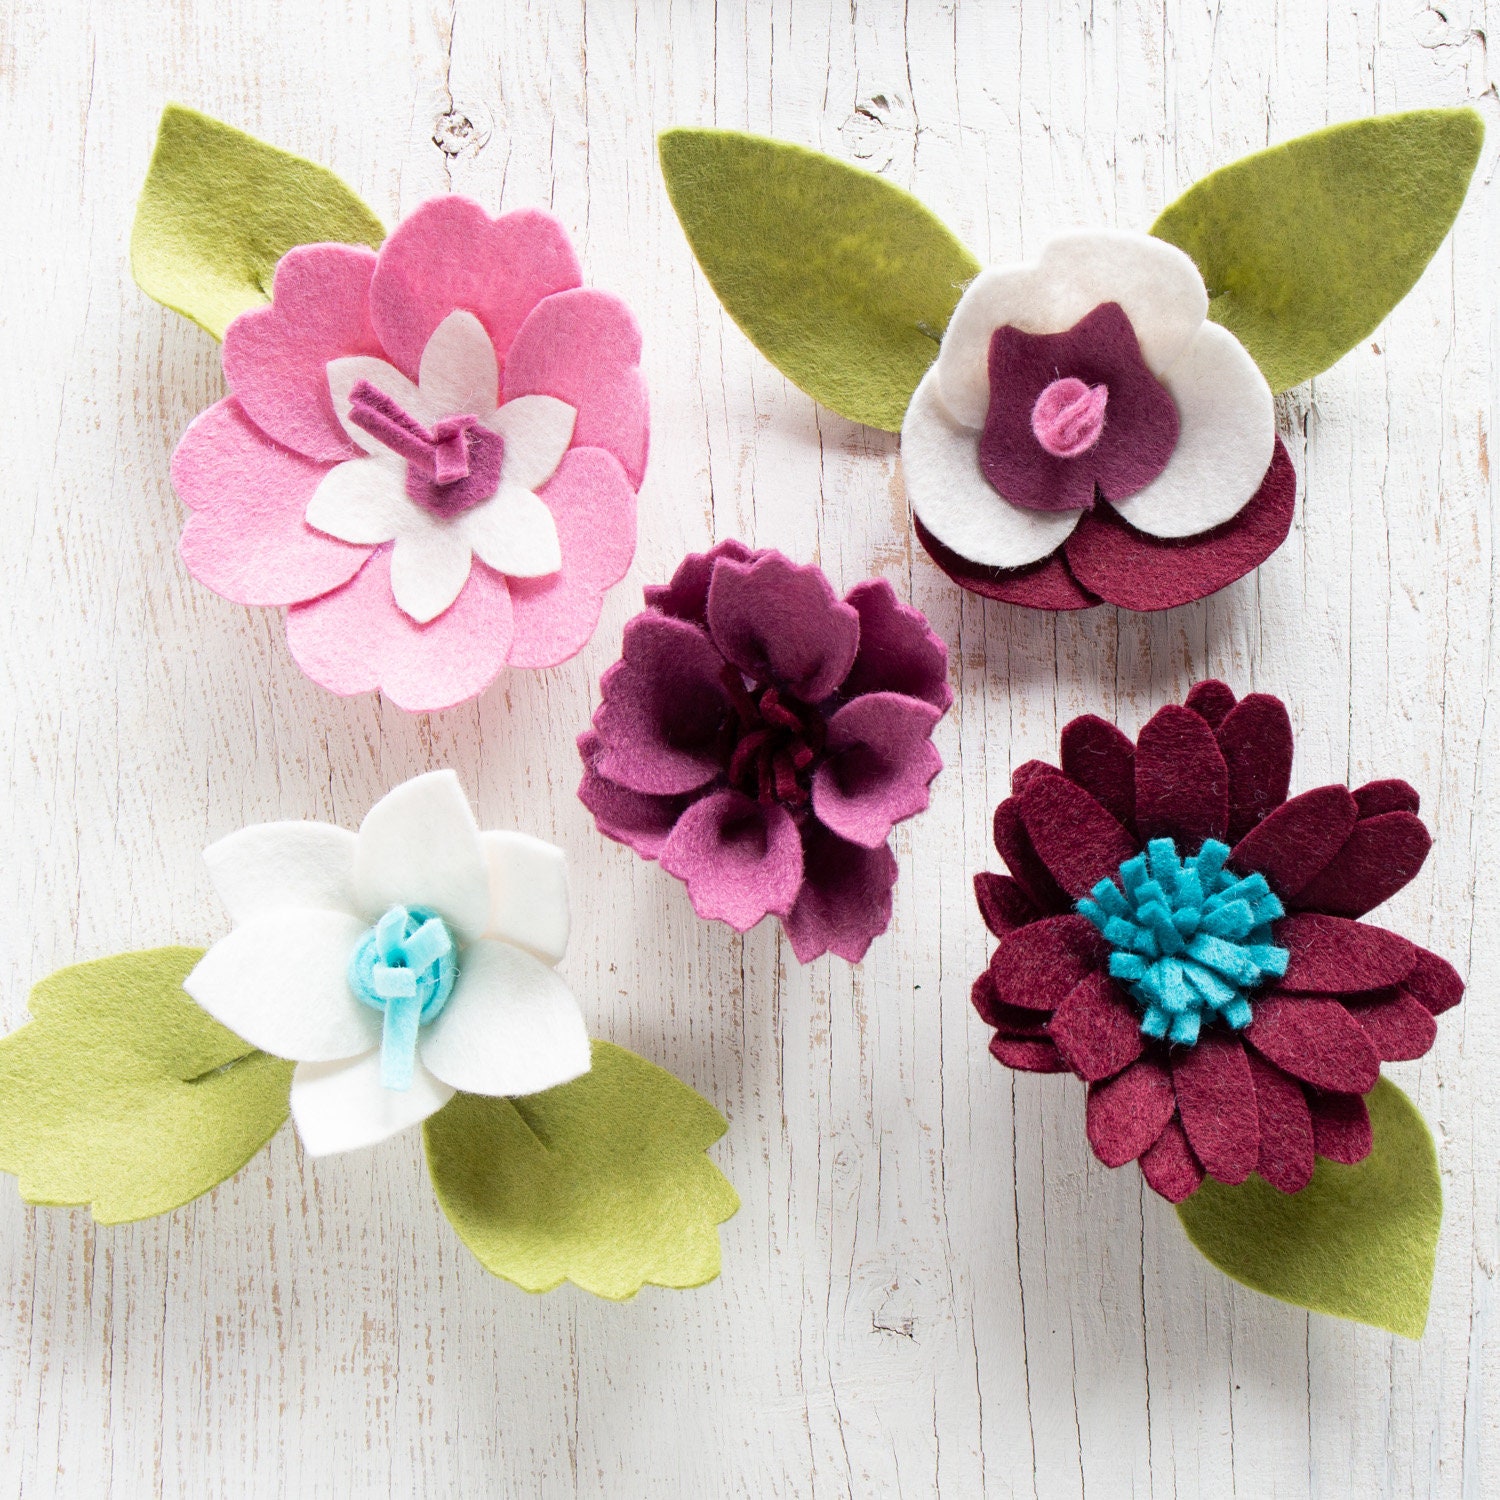 Cricut Crafts with BettesMakes: How to Make a Felt Flower Card with Ease 